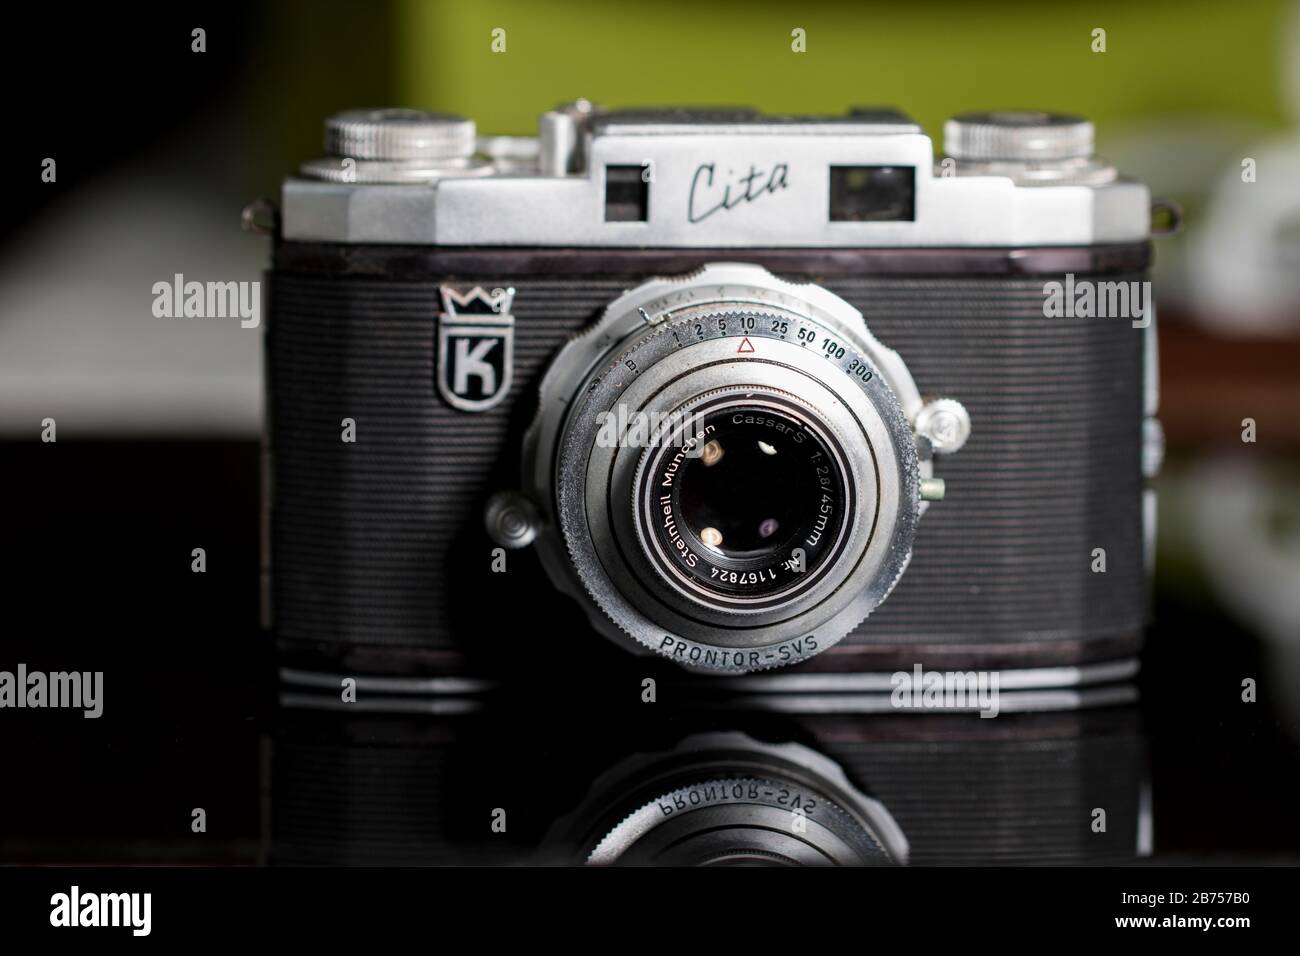 Ontario, Canada 2020: Cita camera close up vintage film photography  equipment. Retro photography technology for taking pictures Stock Photo -  Alamy